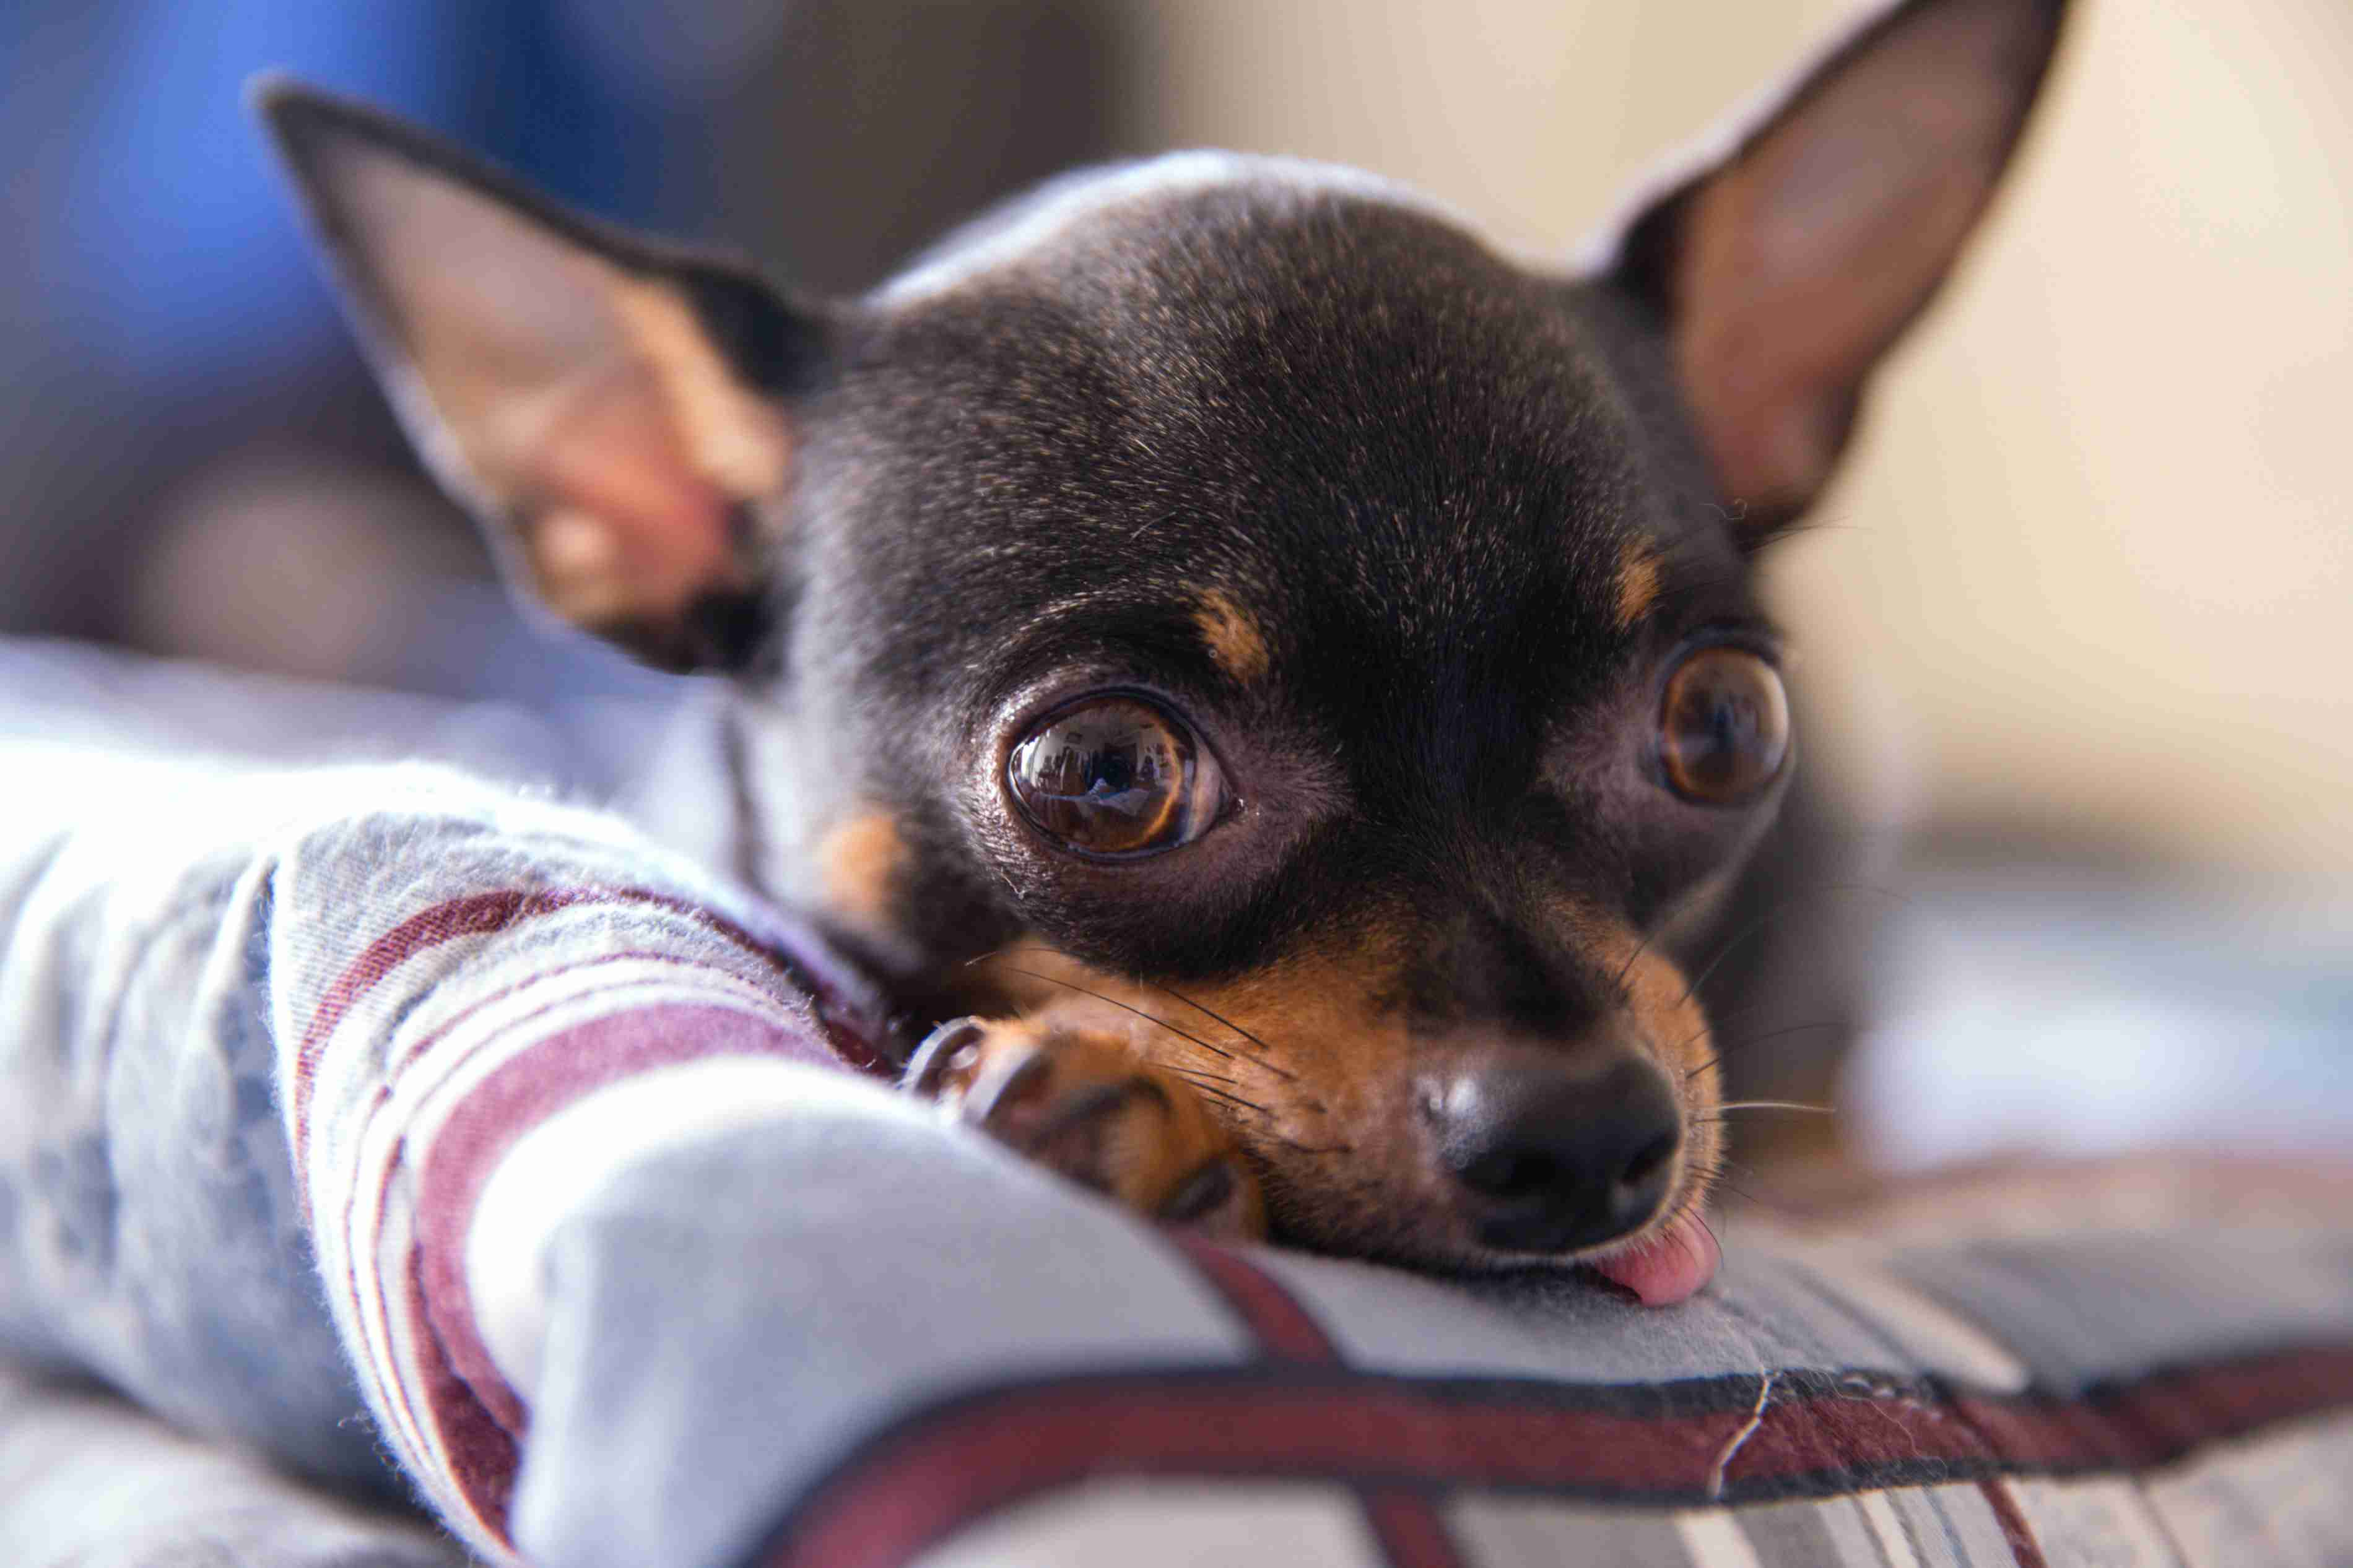 What are some signs of aggression in Chihuahuas?